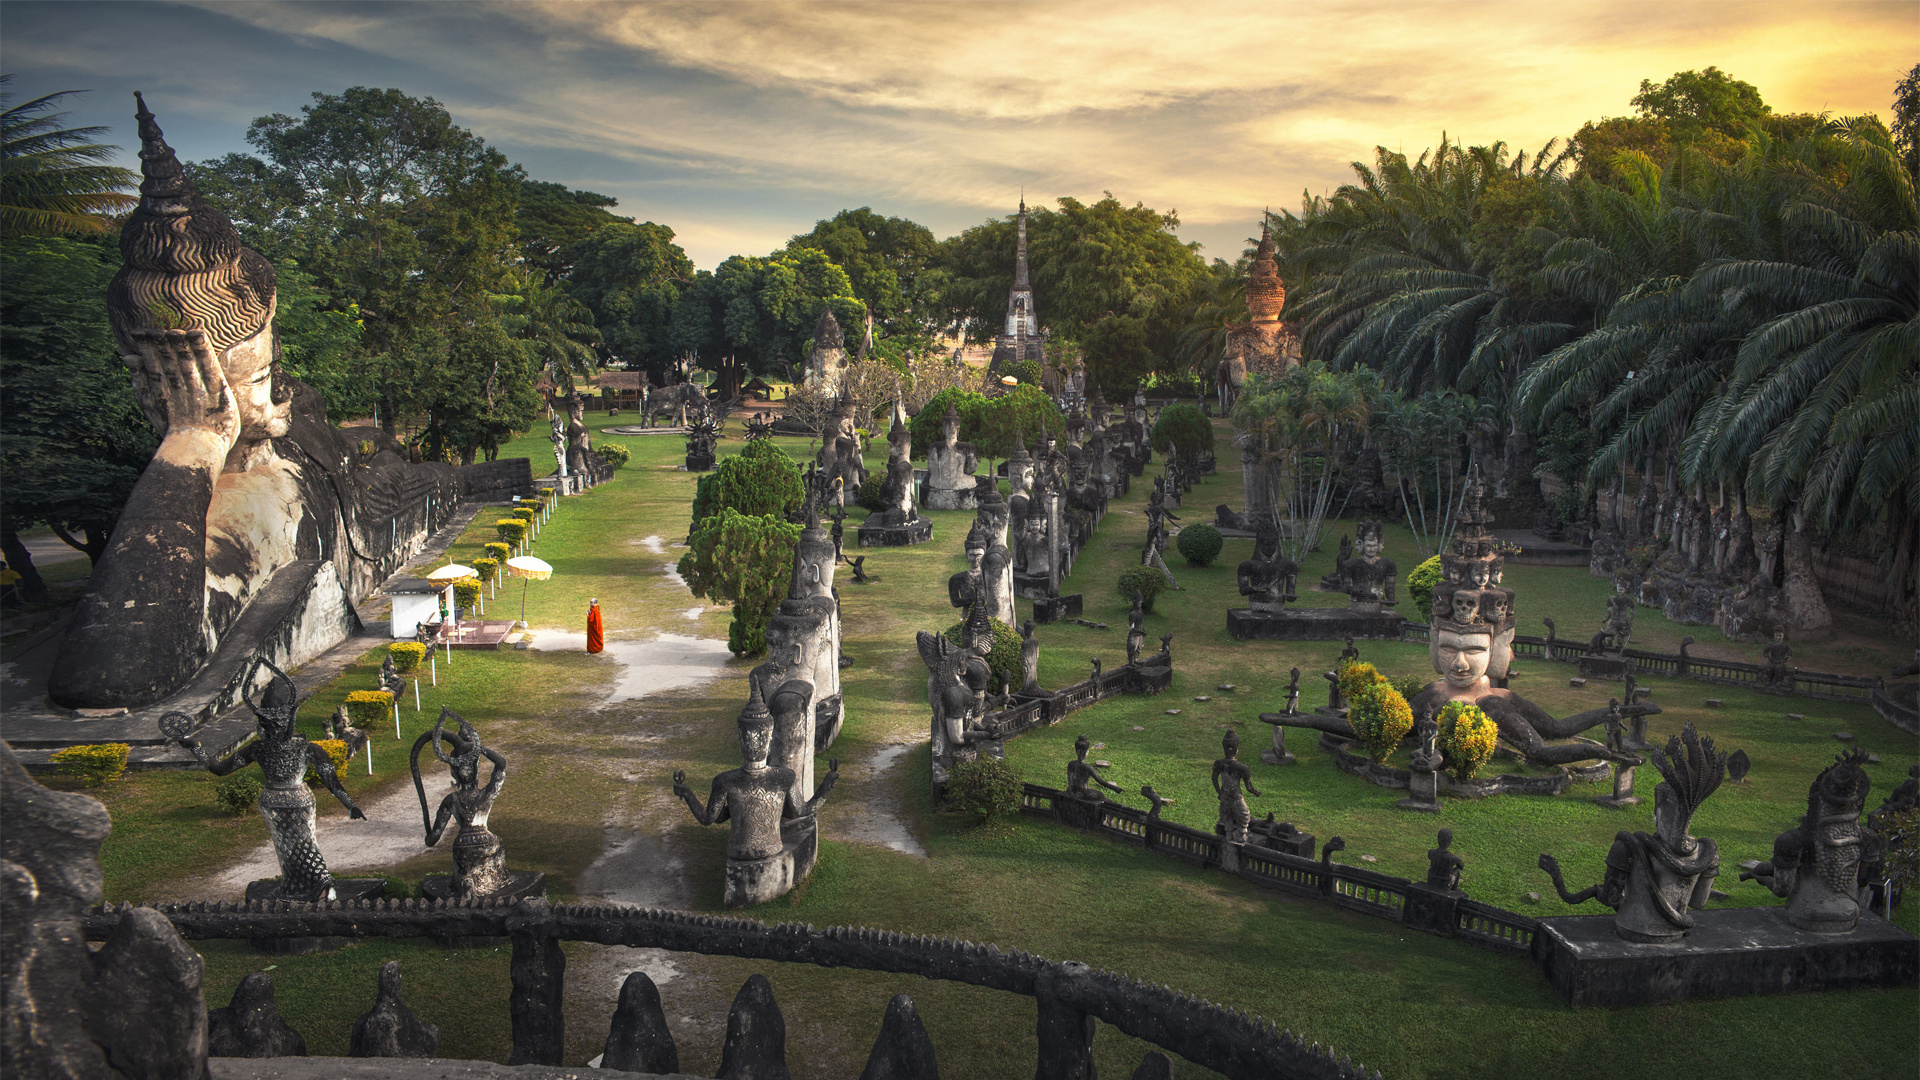 Vientiane, Things to do, Amasia Travel expertise, Adventure beckons, 1920x1080 Full HD Desktop